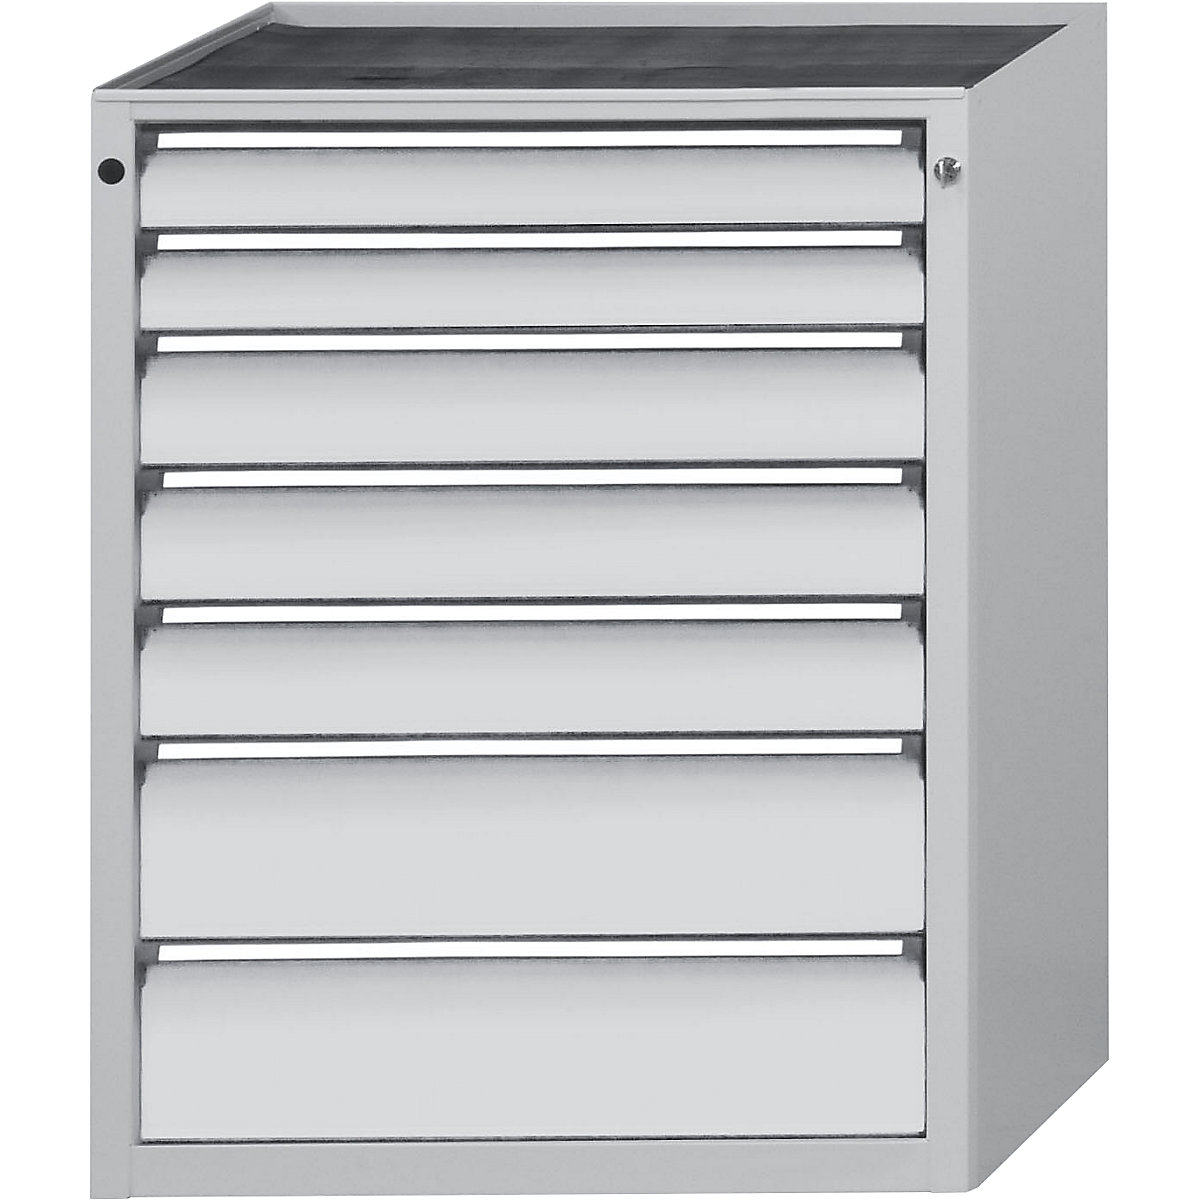 Drawer cupboard – ANKE, WxD 760 x 675 mm, 7 drawers, height 980 mm, front in light grey-16